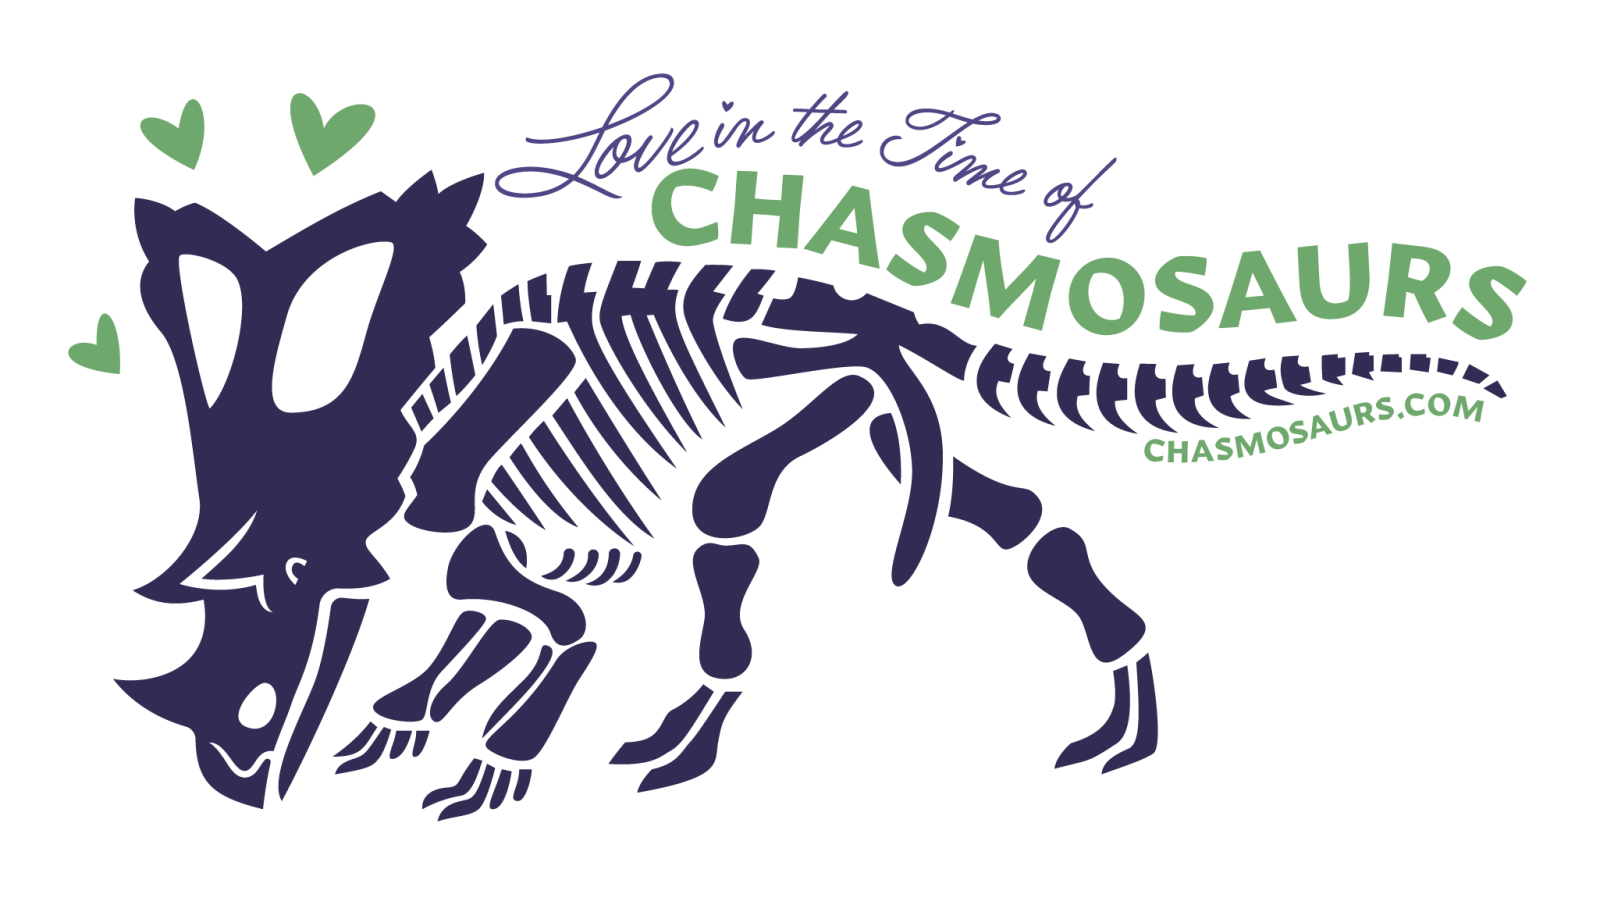 A stylized image of a chasmosaurus skeleton with the text "Love in the Time of Chasmosaurs" along its back and tail. The URL chasmosaurs.com is written along the bottom of the tail. The skeleton is purple and the text is green and purple.